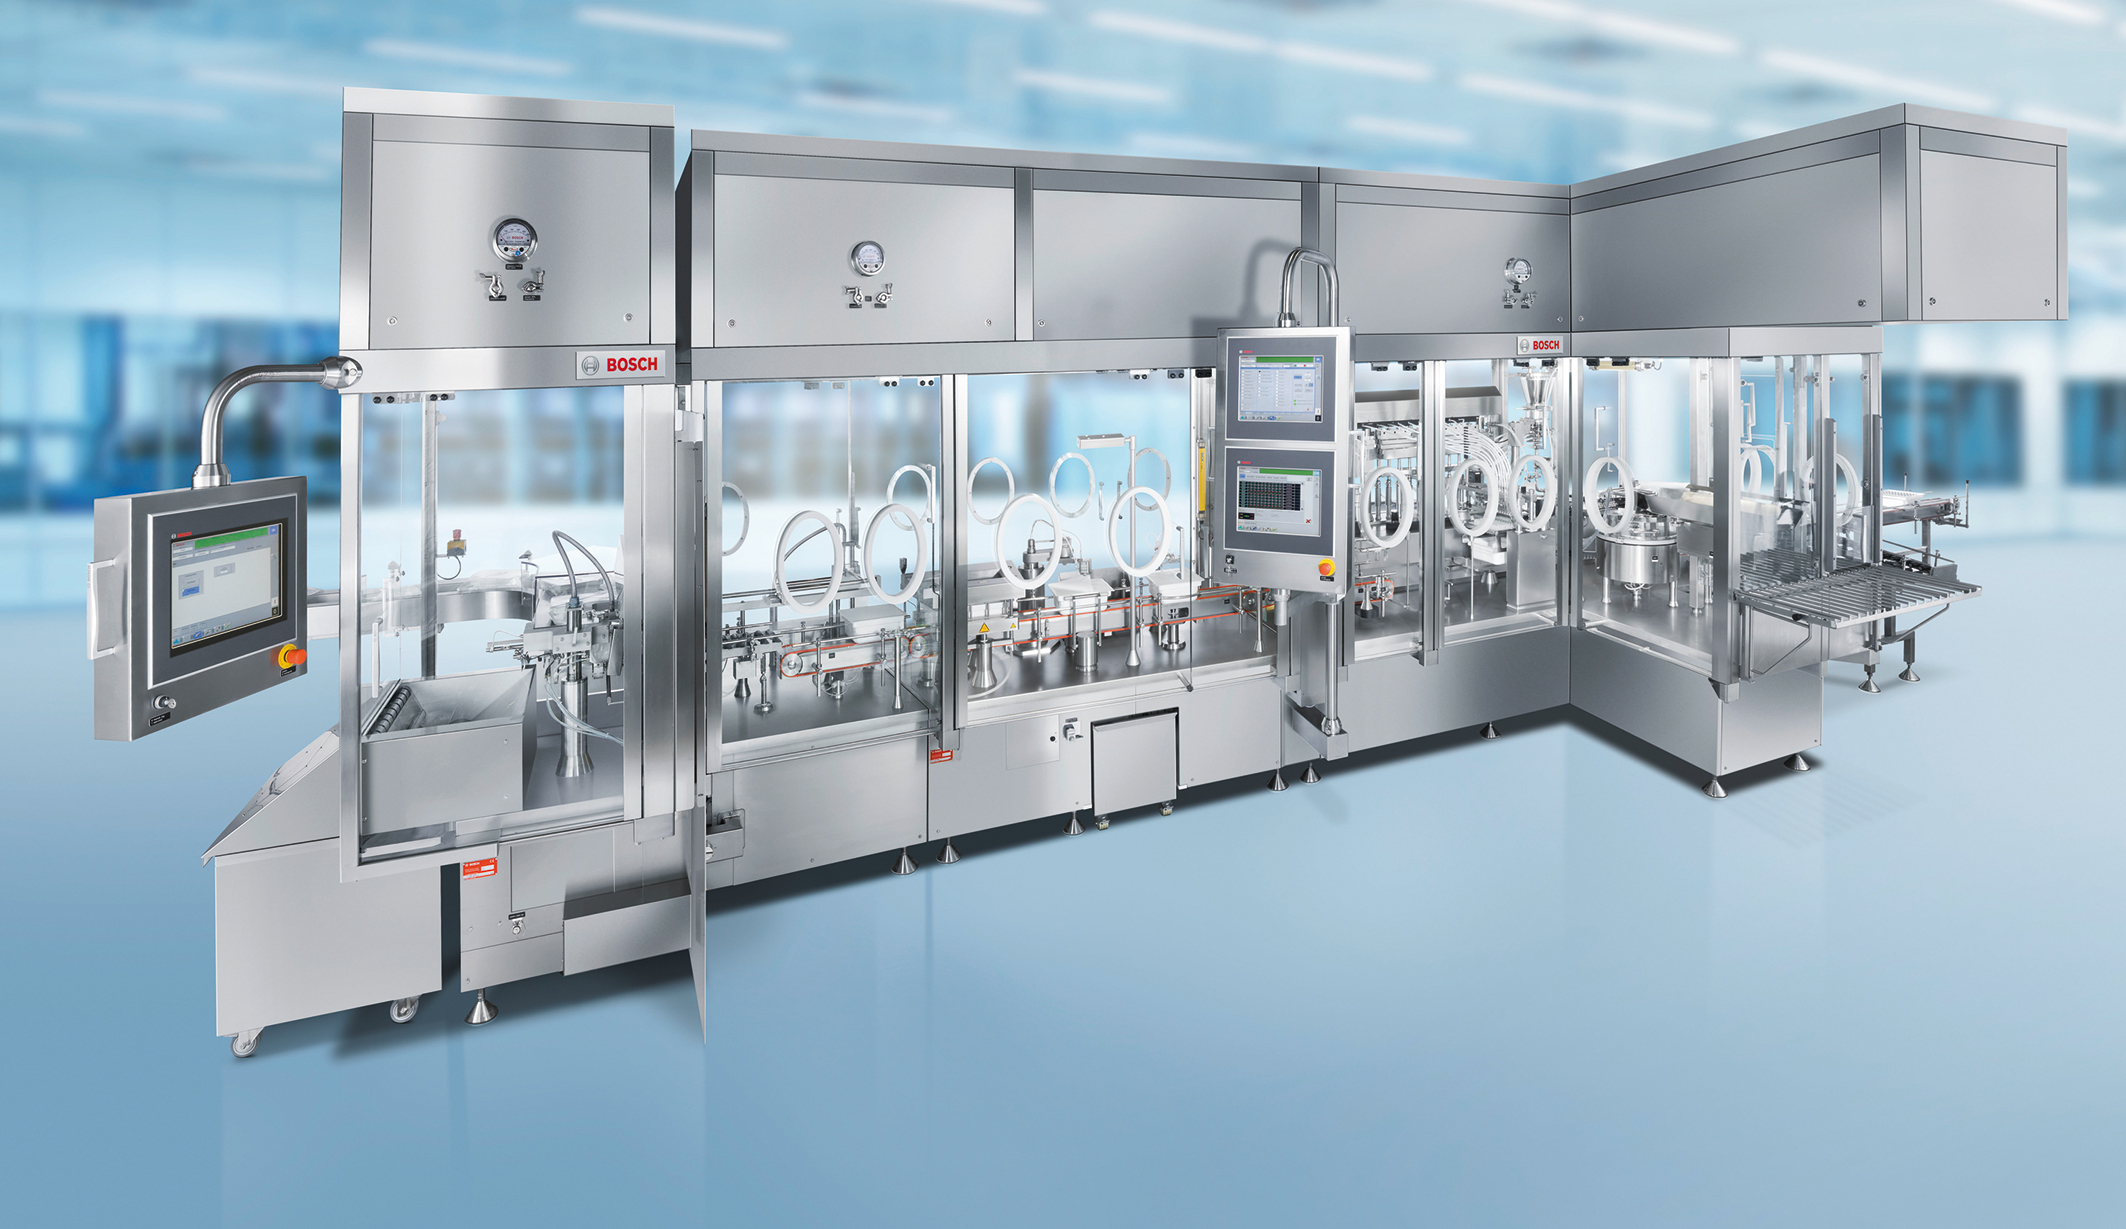 Bosch Presents New Developments For The Pharmaceutical Industry